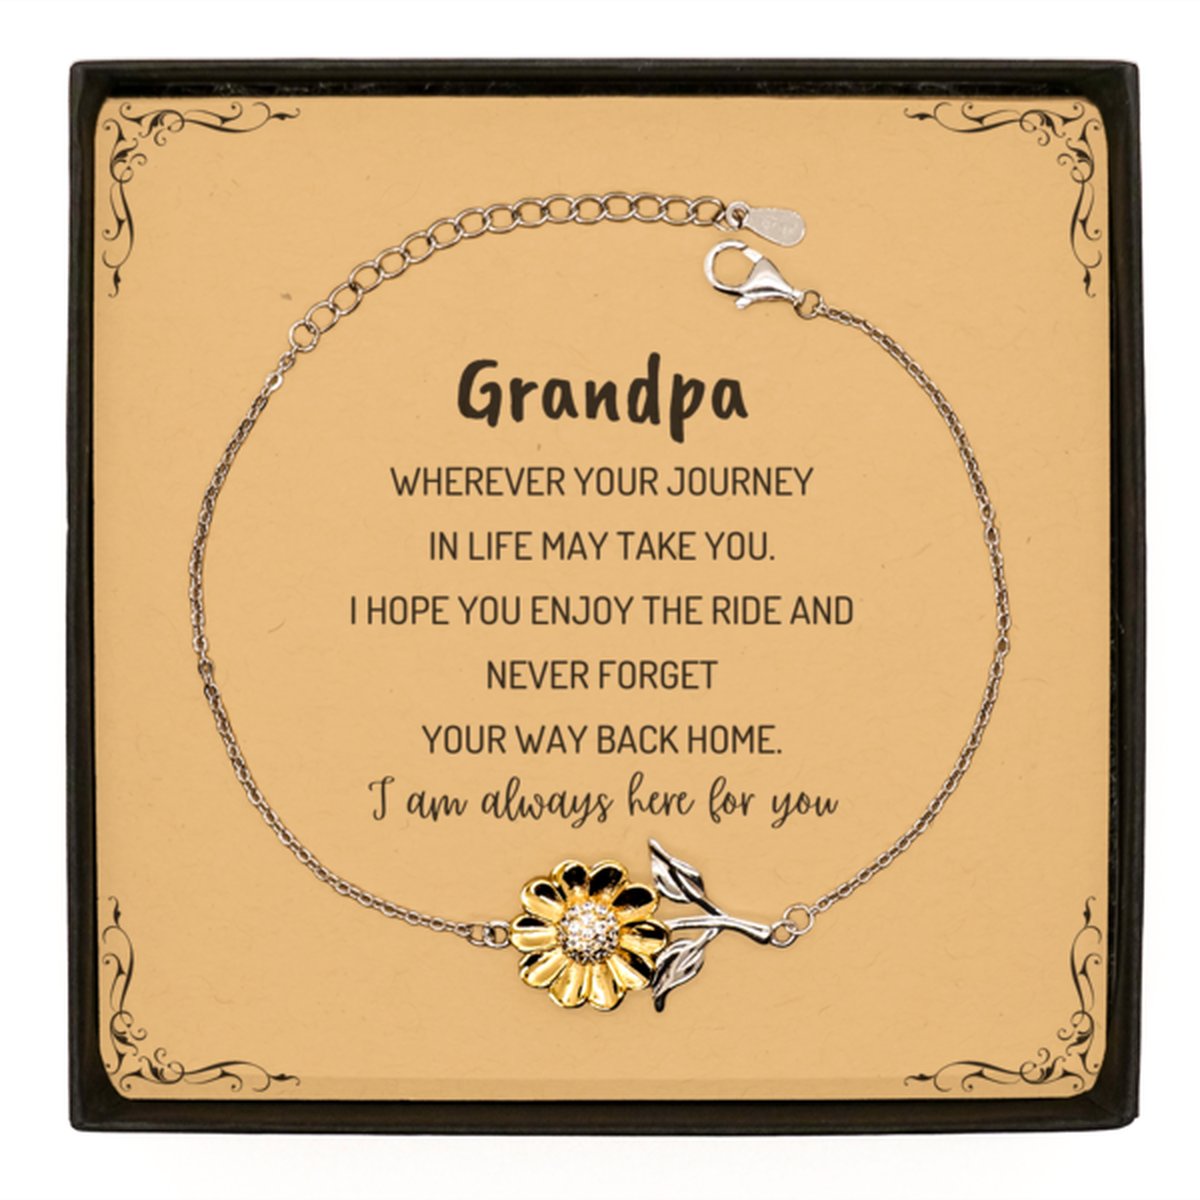 Grandpa wherever your journey in life may take you, I am always here for you Grandpa Sunflower Bracelet, Awesome Christmas Gifts For Grandpa Message Card, Grandpa Birthday Gifts for Men Women Family Loved One